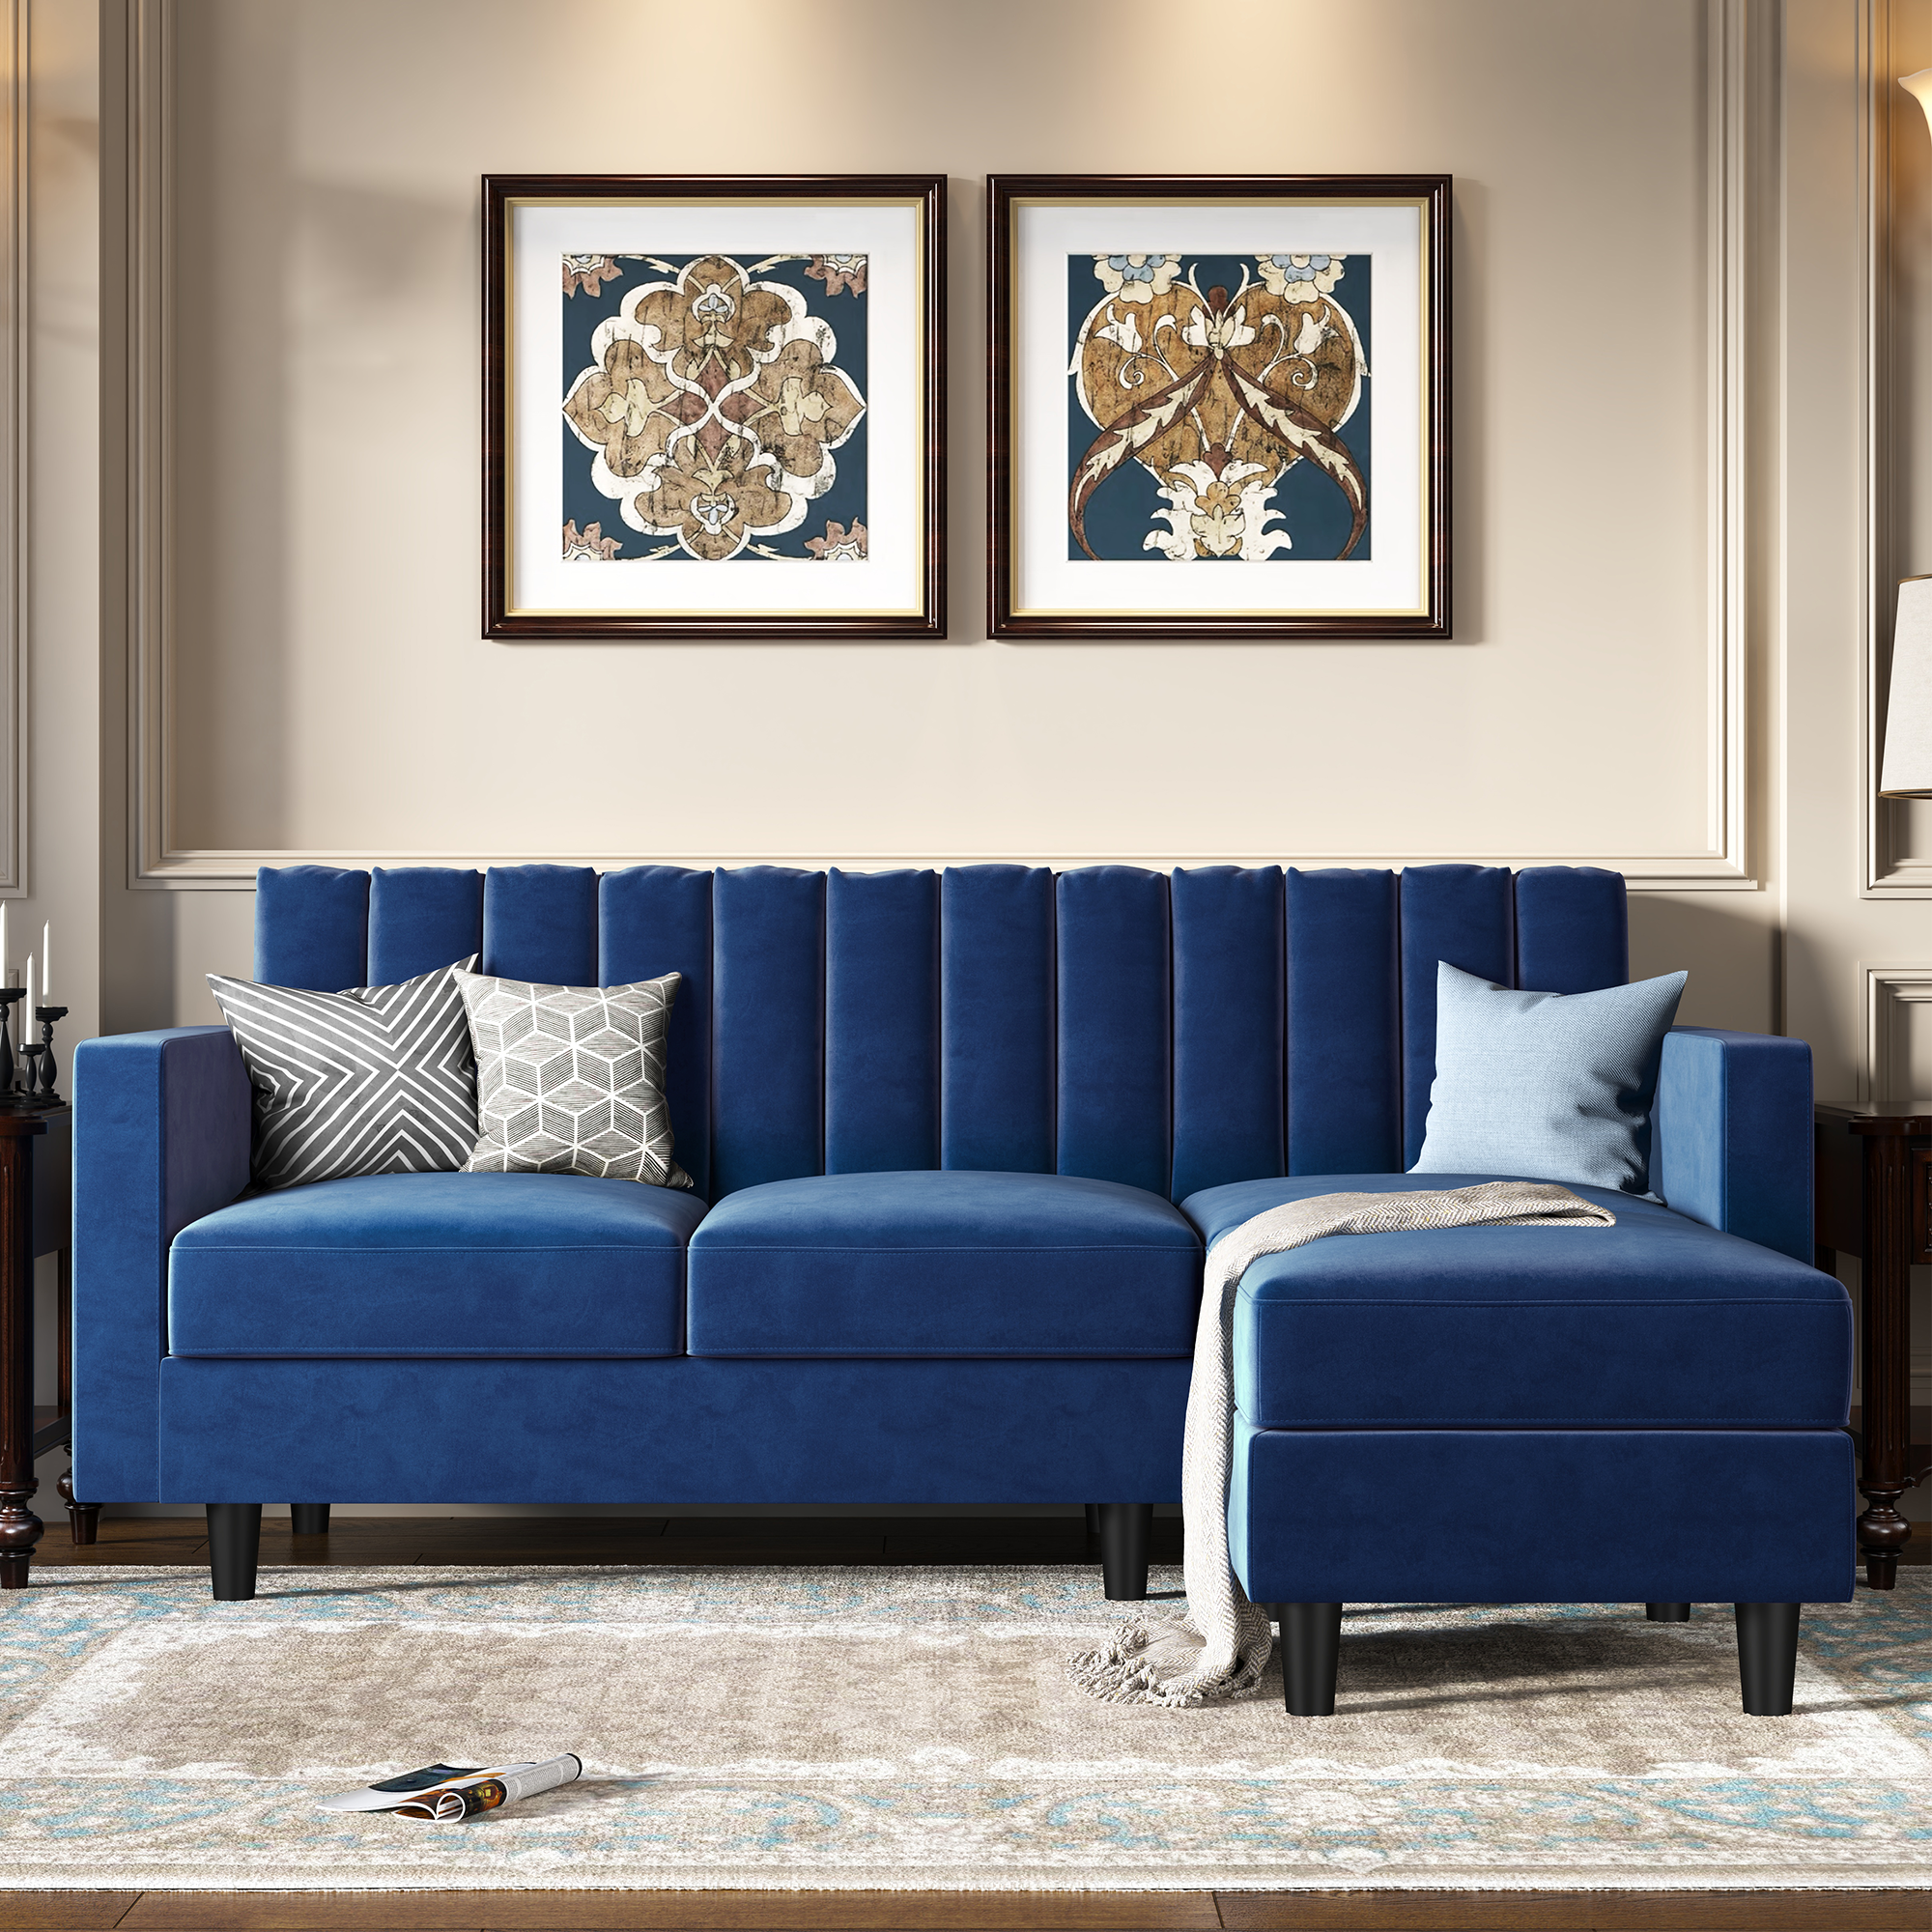 HONBAY Velvet 3-Seat L-Shaped Sectional Sofa with Tufted Back